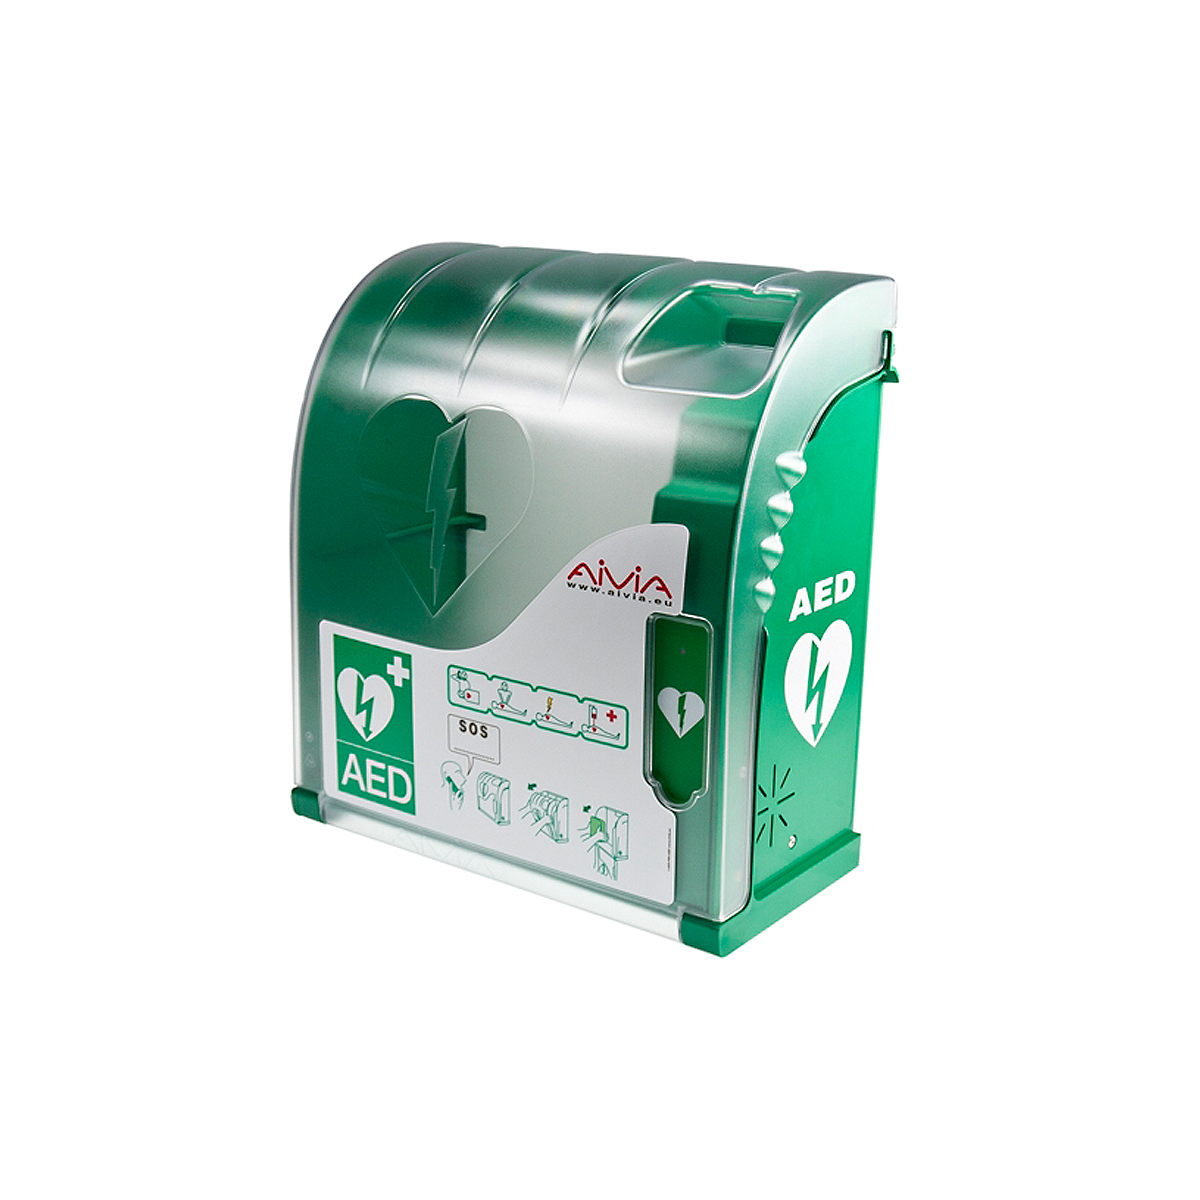 Aivia 200 Defibrillator Wall Cabinet with Alarm and Heating